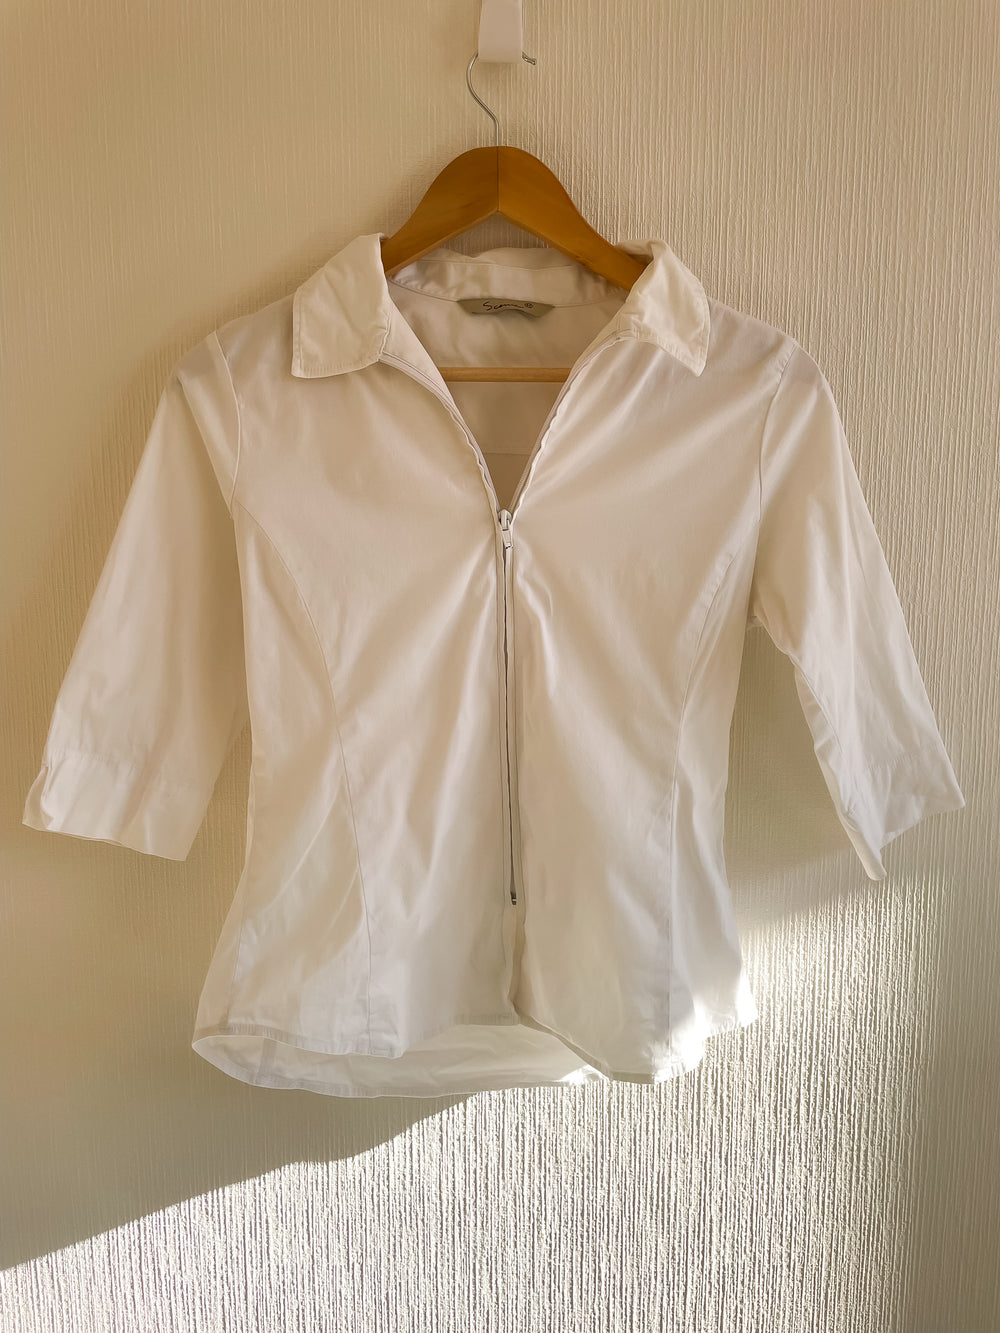 Chemise manches 3/4 blanche avec zip - taille S/M